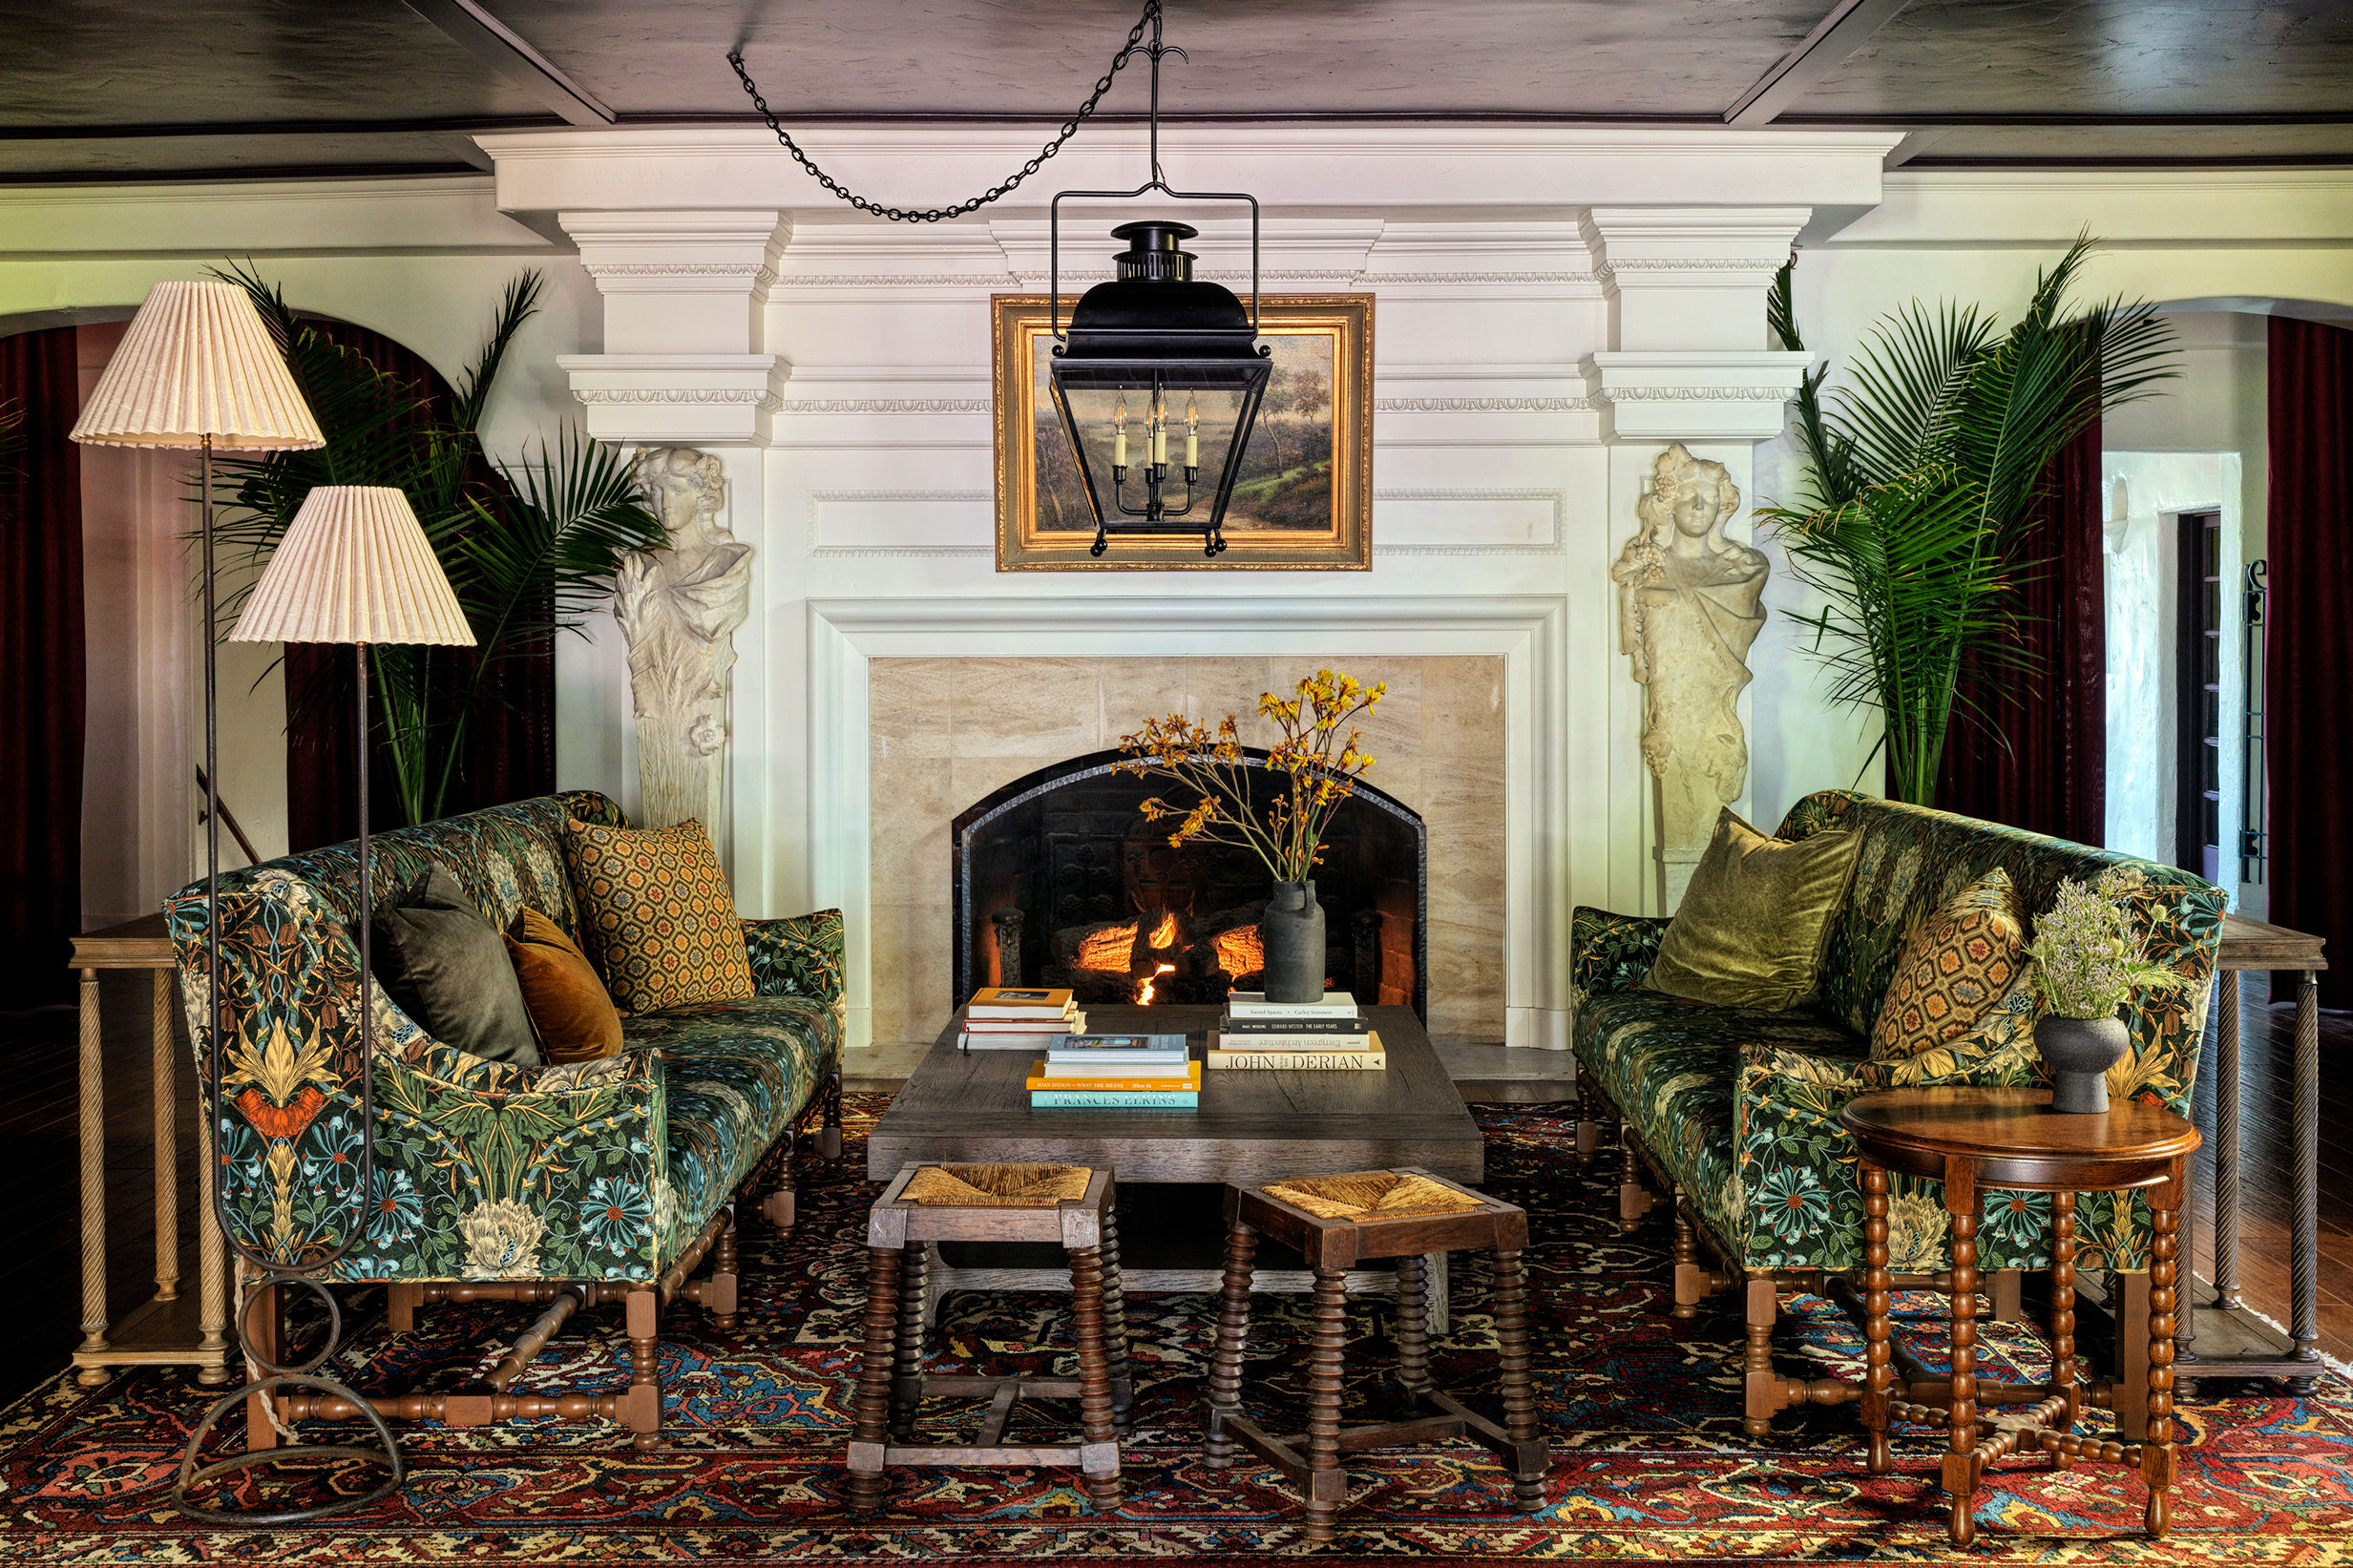 Two couches with a green and floral design sit across from a wooden coffee table in front of an ornate fireplace